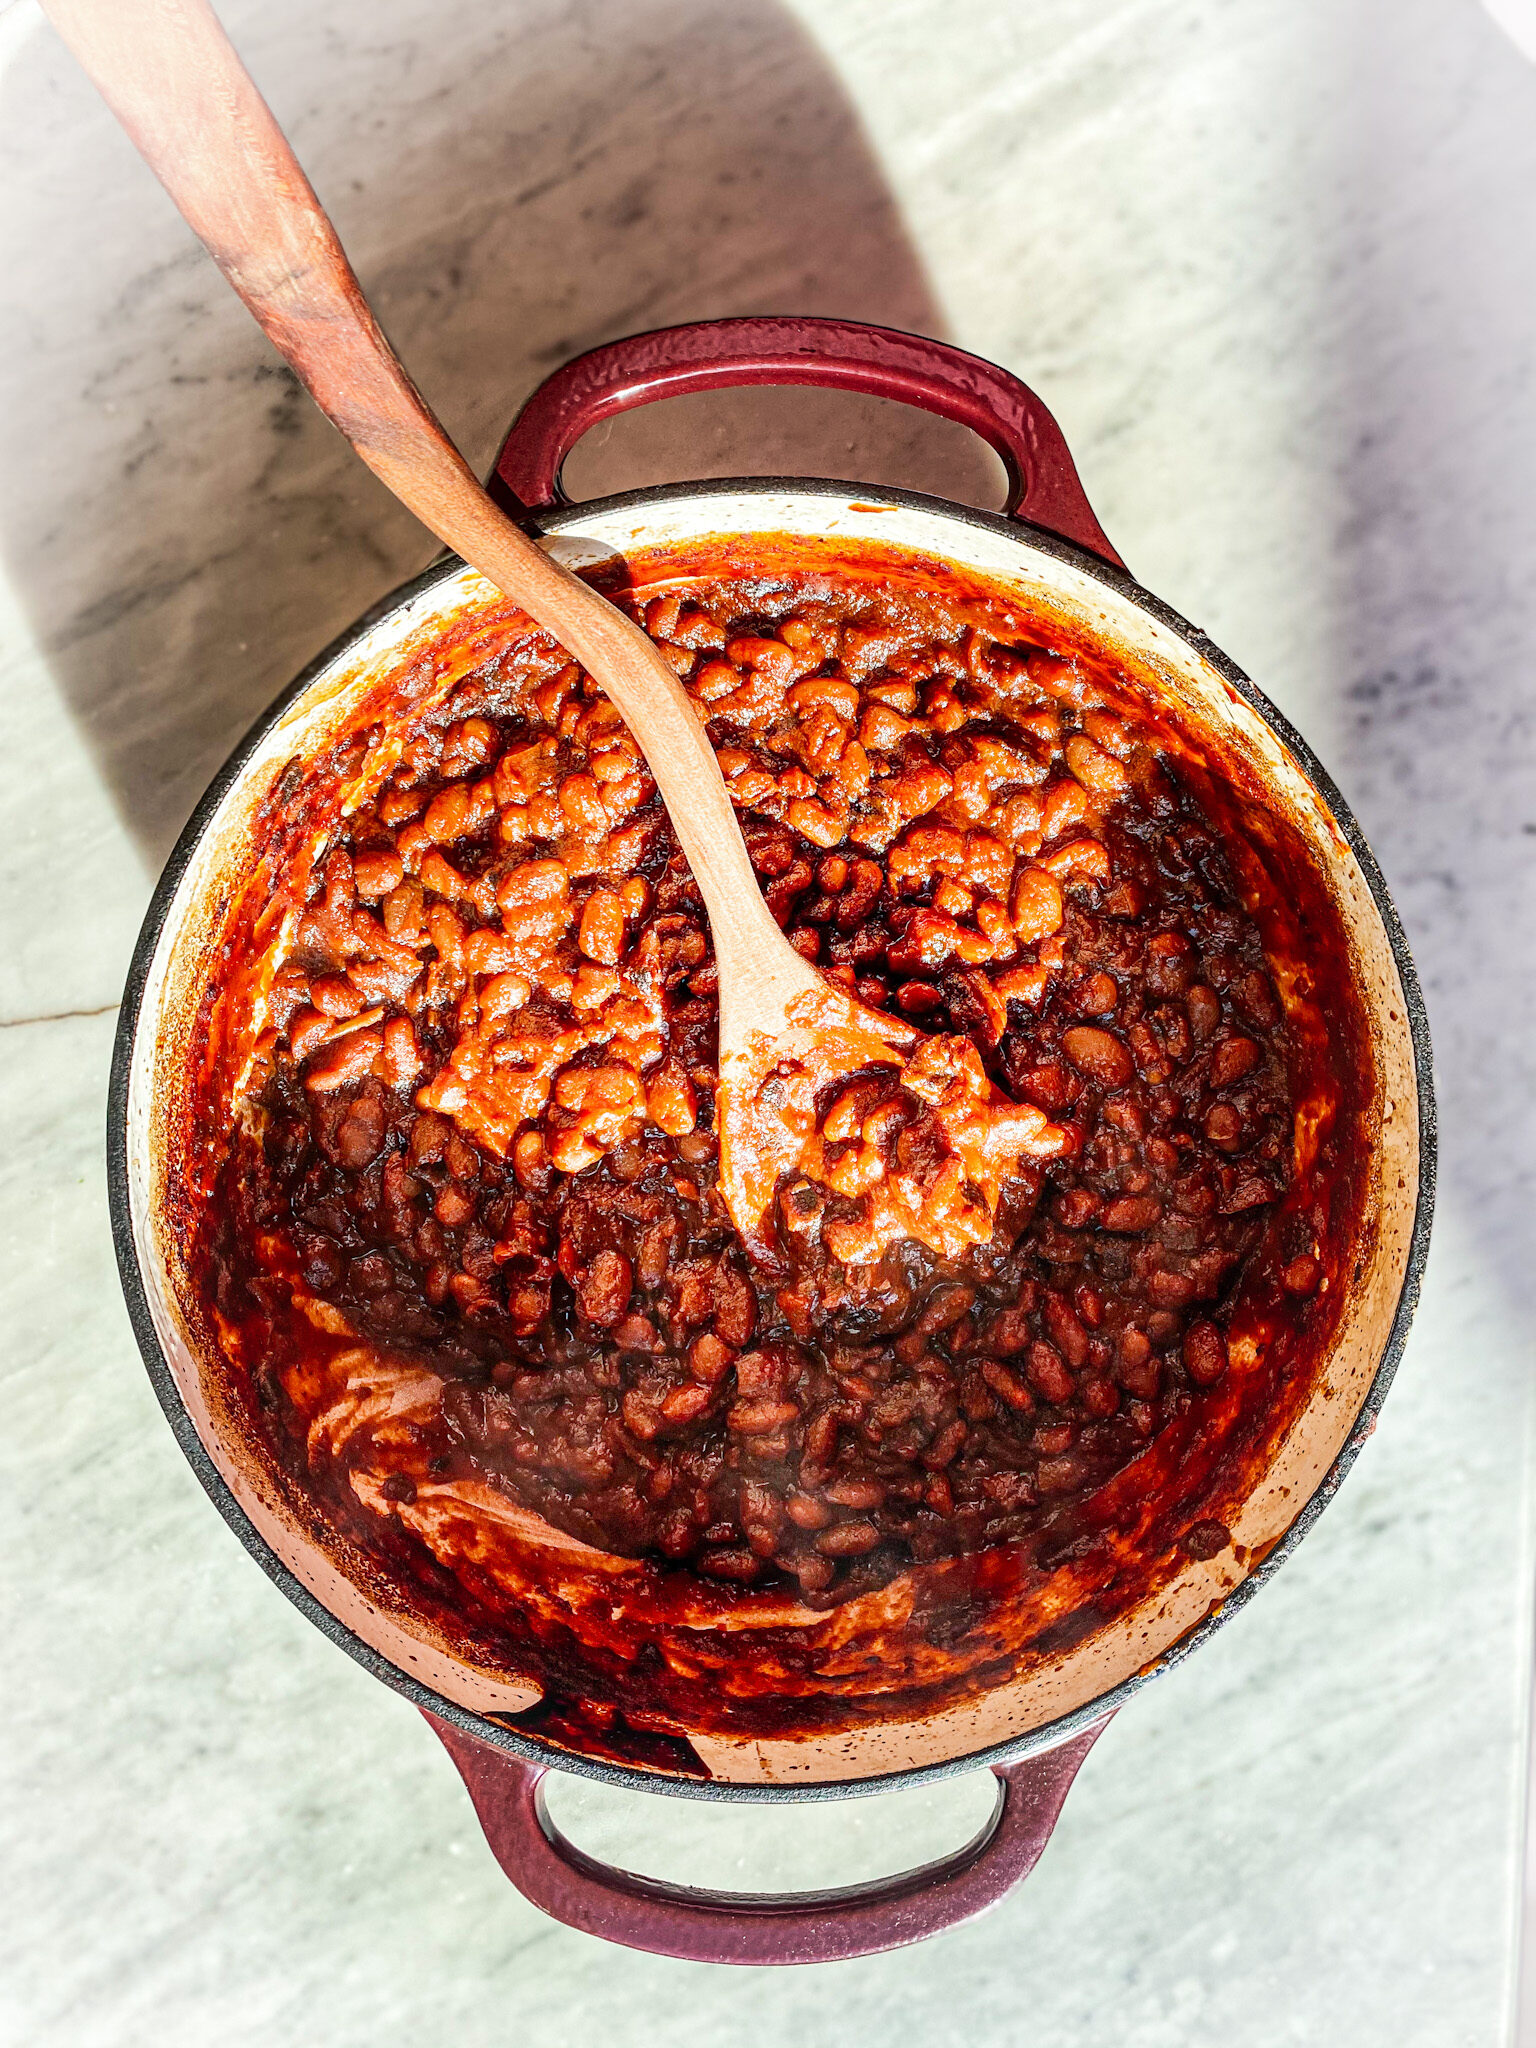 Baked beans in a cast iron dutch oven with a wooden spoon